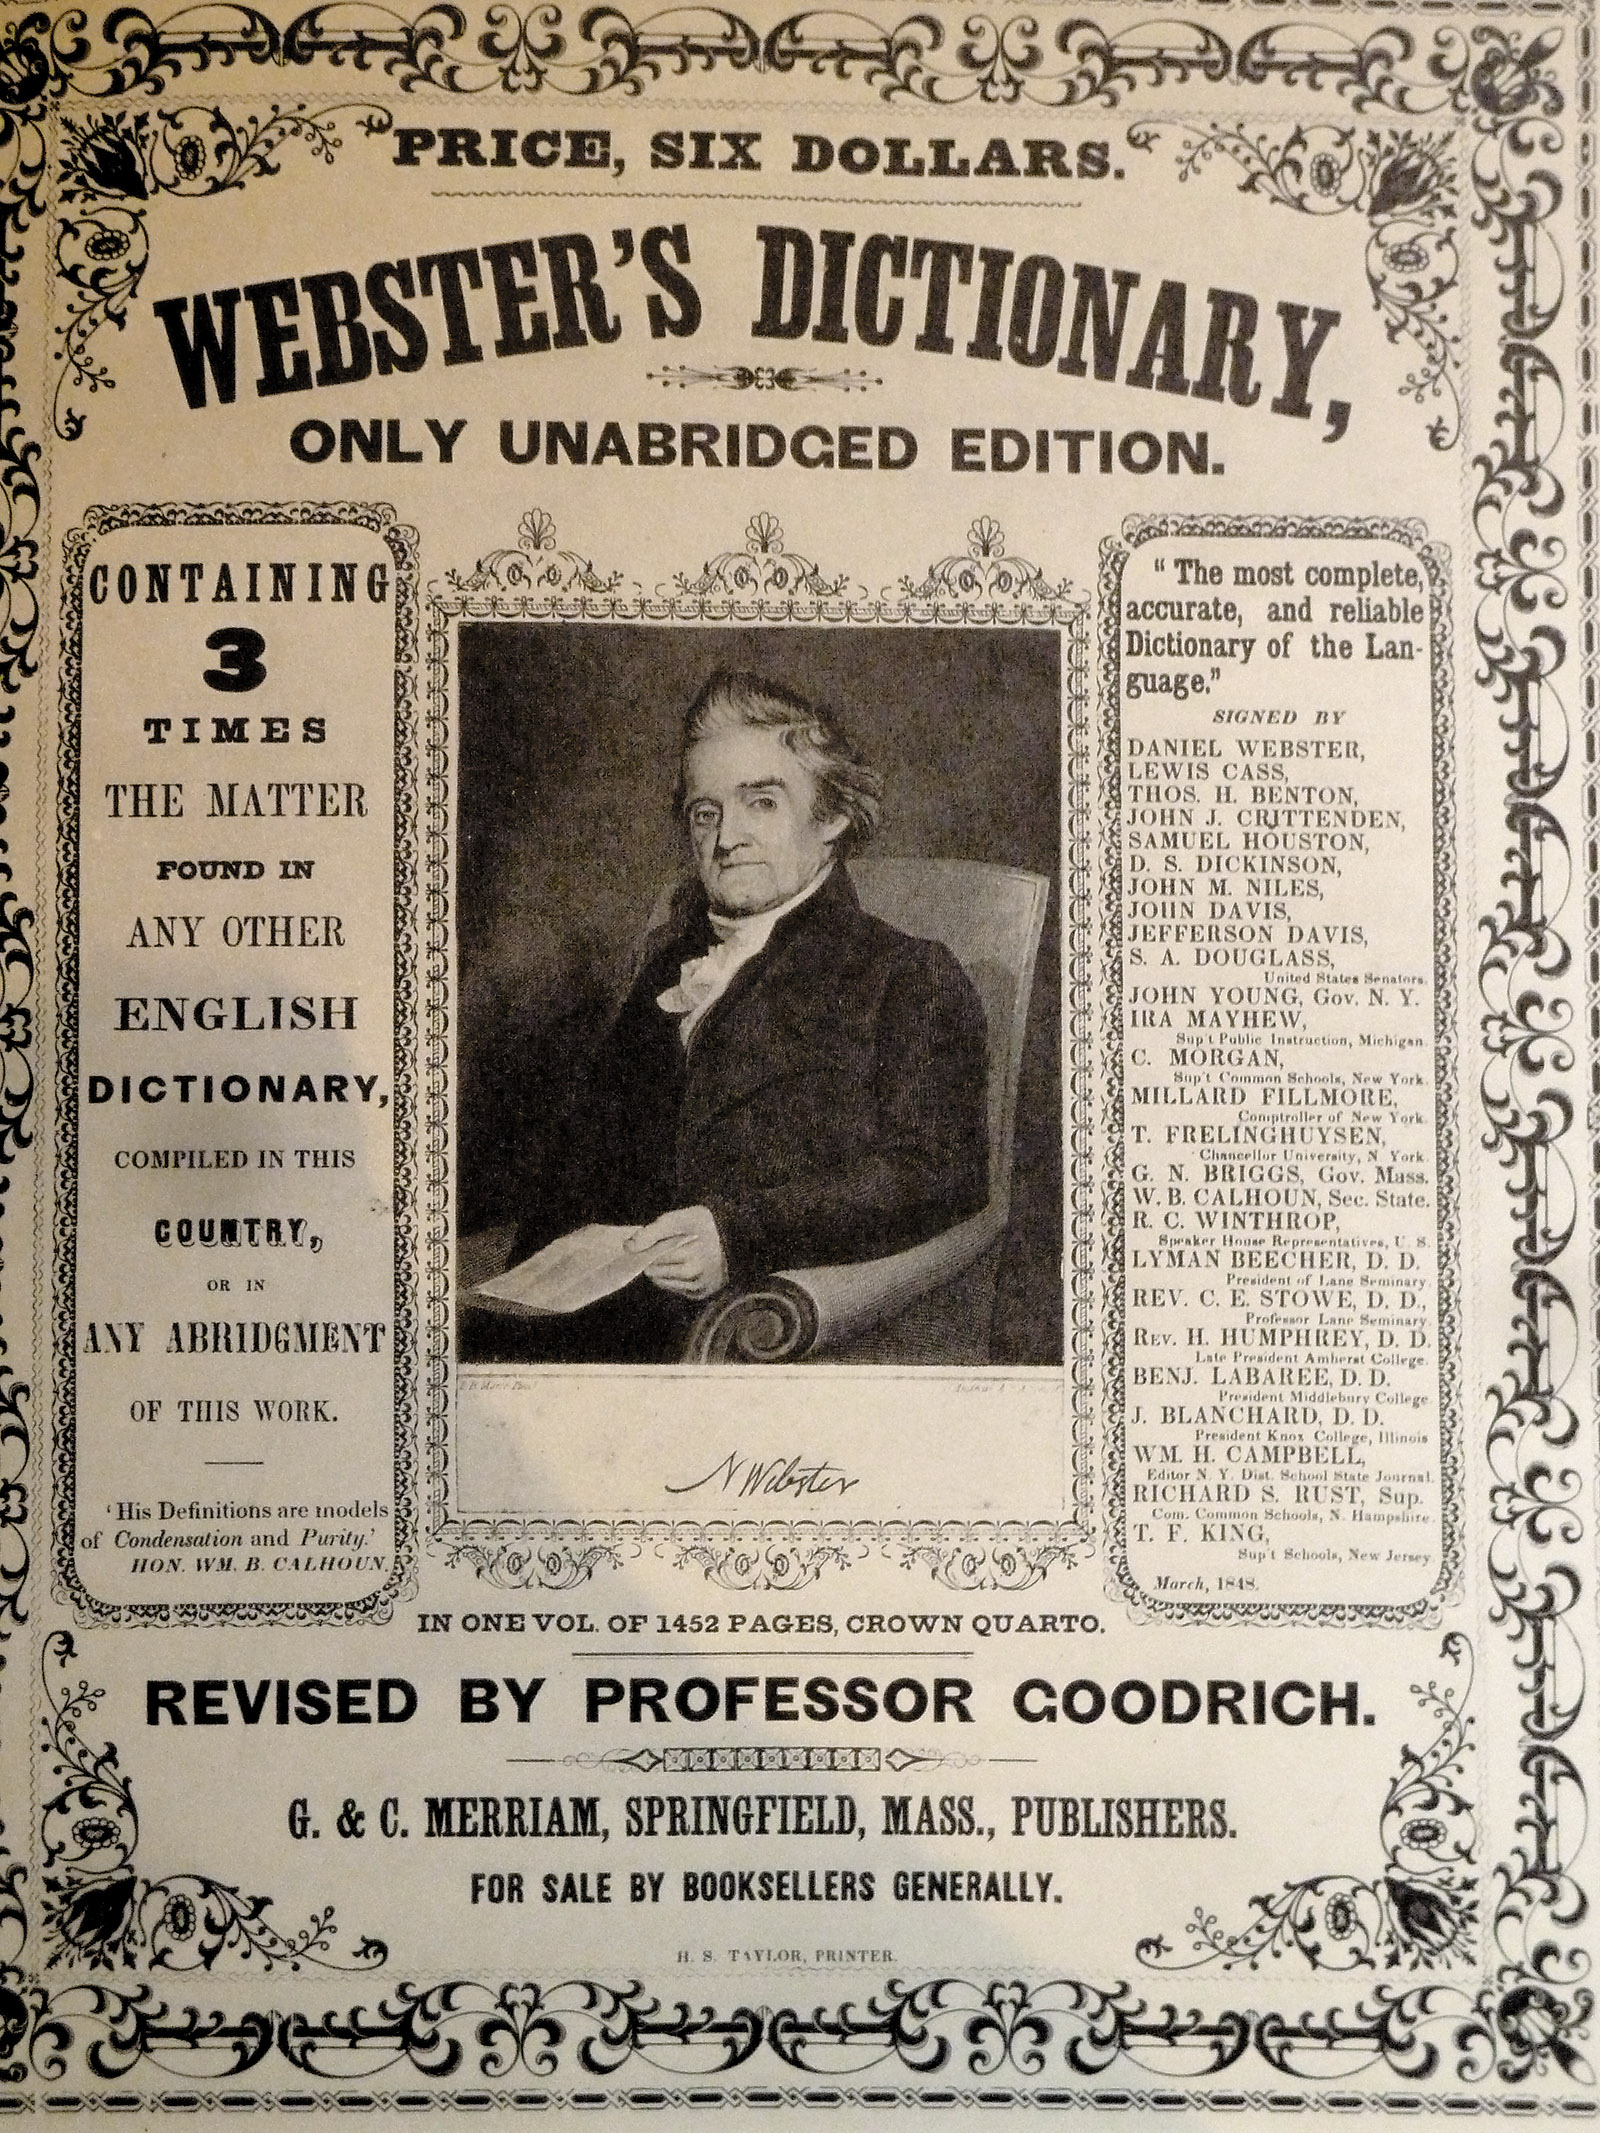 A portrait of Noah Webster in an advertisement for the first Merriam edition of Webster’s dictionary, published in 1847–1848